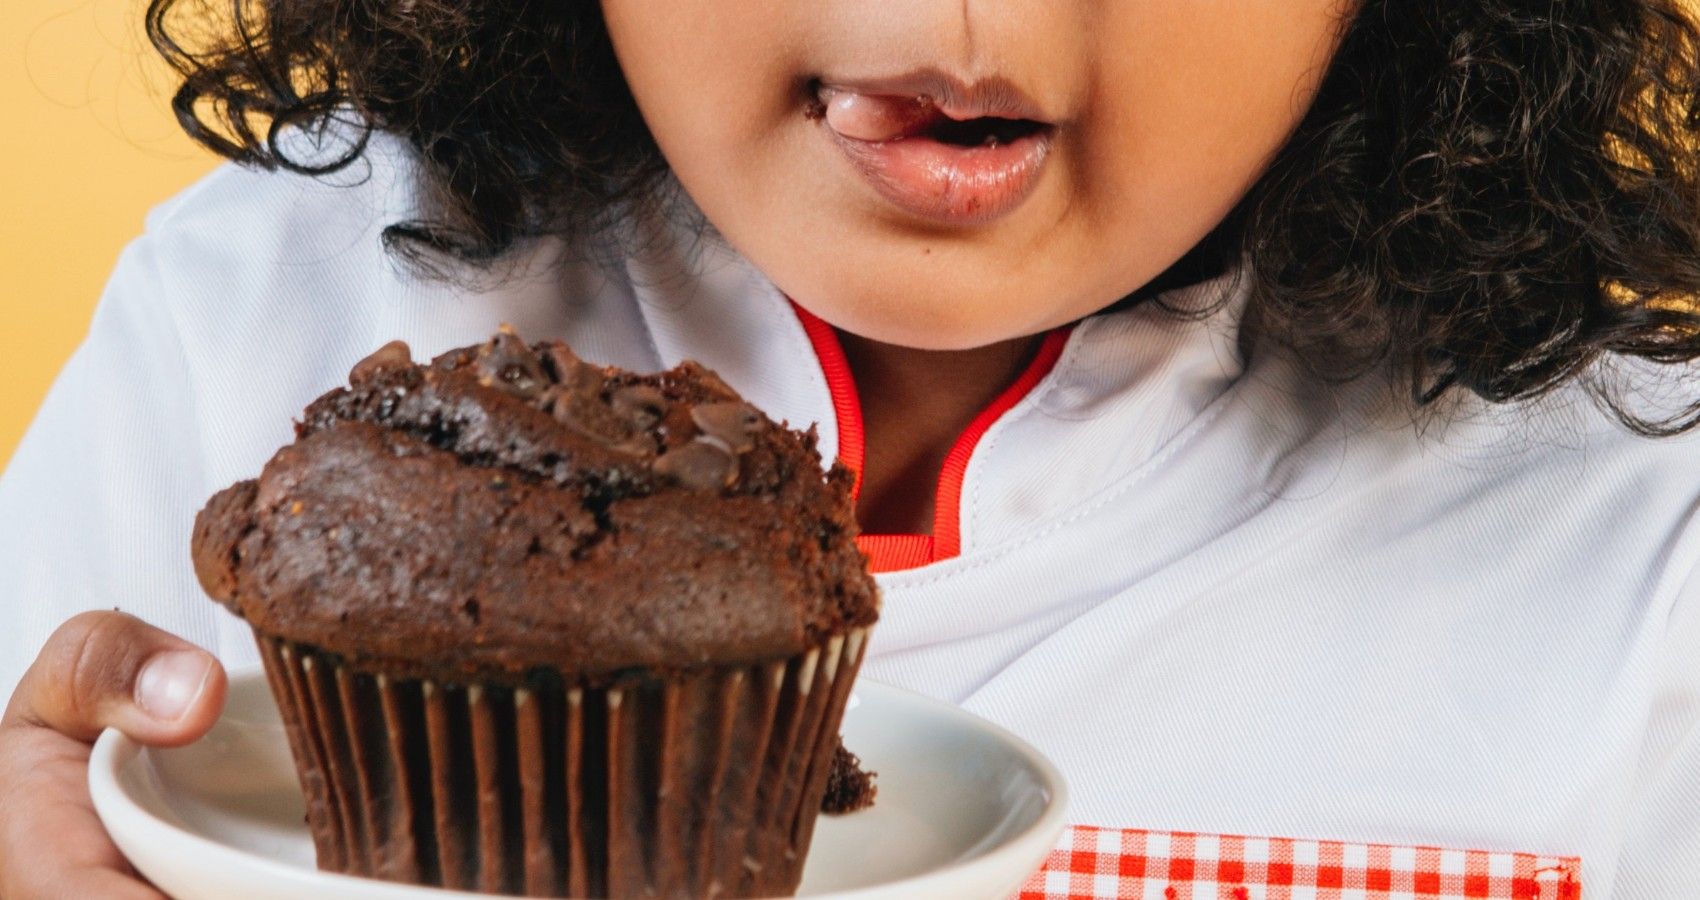 A child holding up a chocolate cupcake